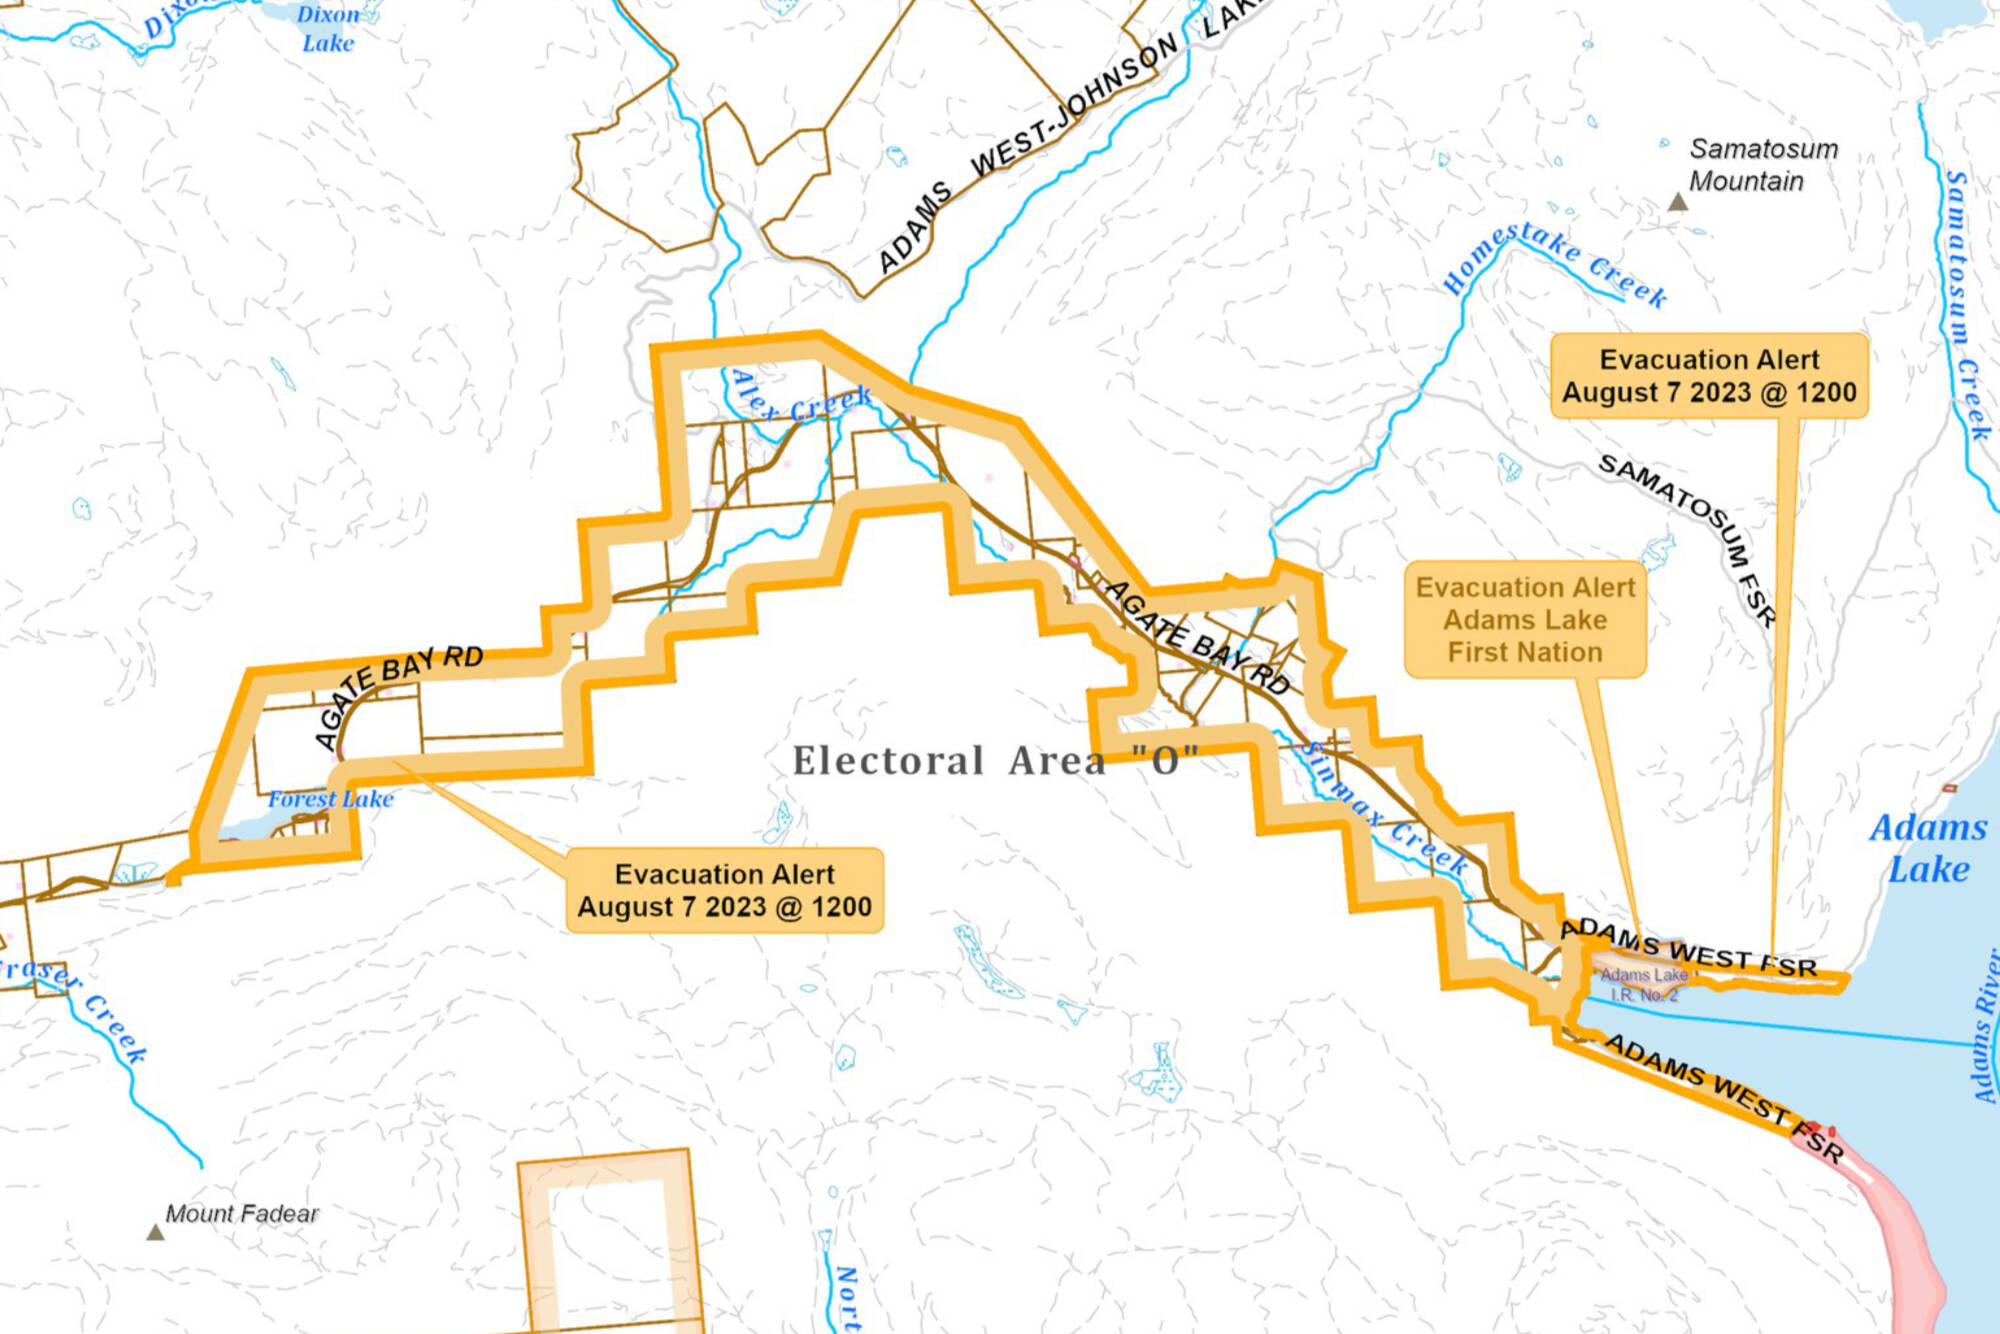 The Thompson Nicola Regional District issued an evacuation alert Monday, Aug. 7, for 85 properties west of Adams Lake. The alert comes in response to the Bush Creek East wildfire, which has been burning since July 12. (TNRD image)